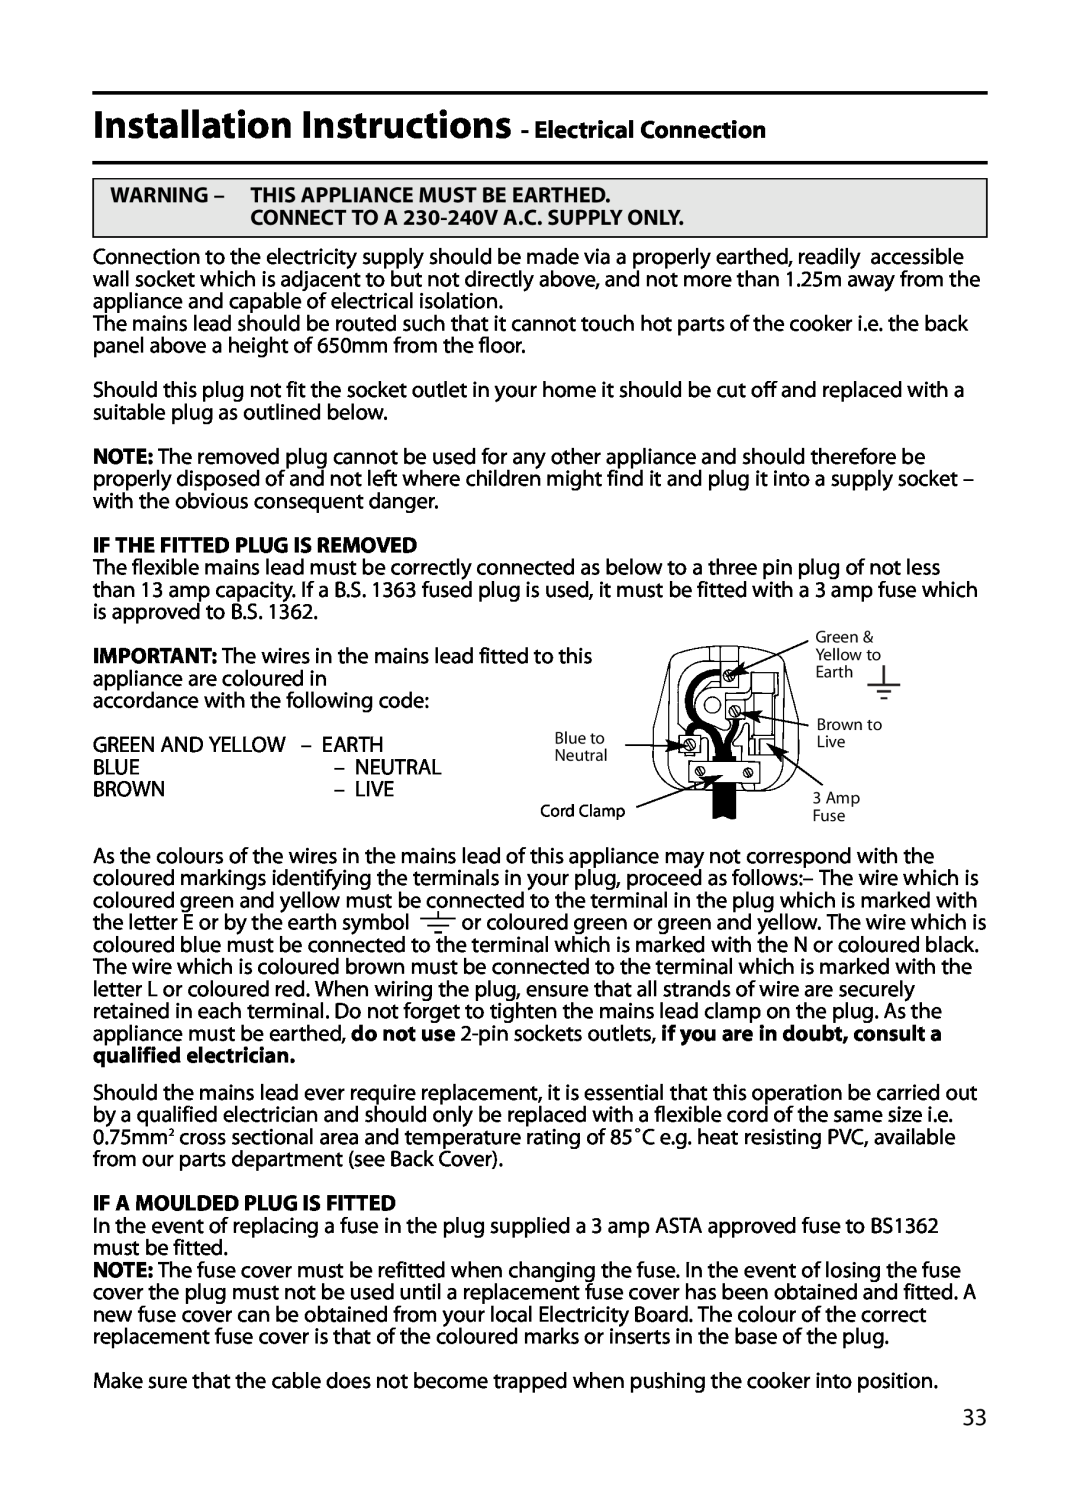 Indesit KD641G, KD643G, KD640G Installation Instructions - Electrical Connection, Warning - This Appliance Must Be Earthed 